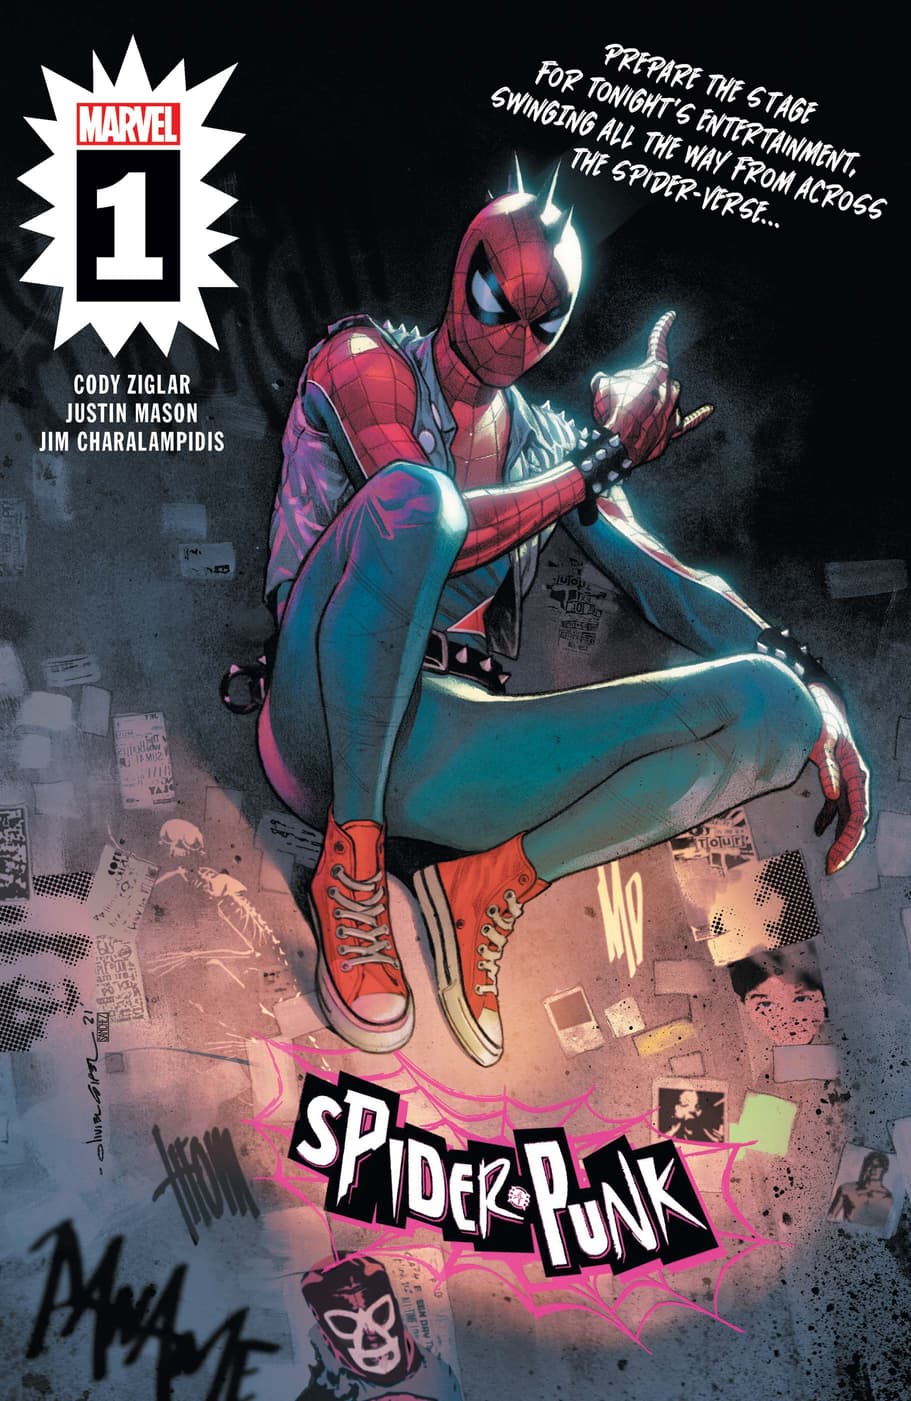 Spider-Punk #1 cover by Olivier Coipel